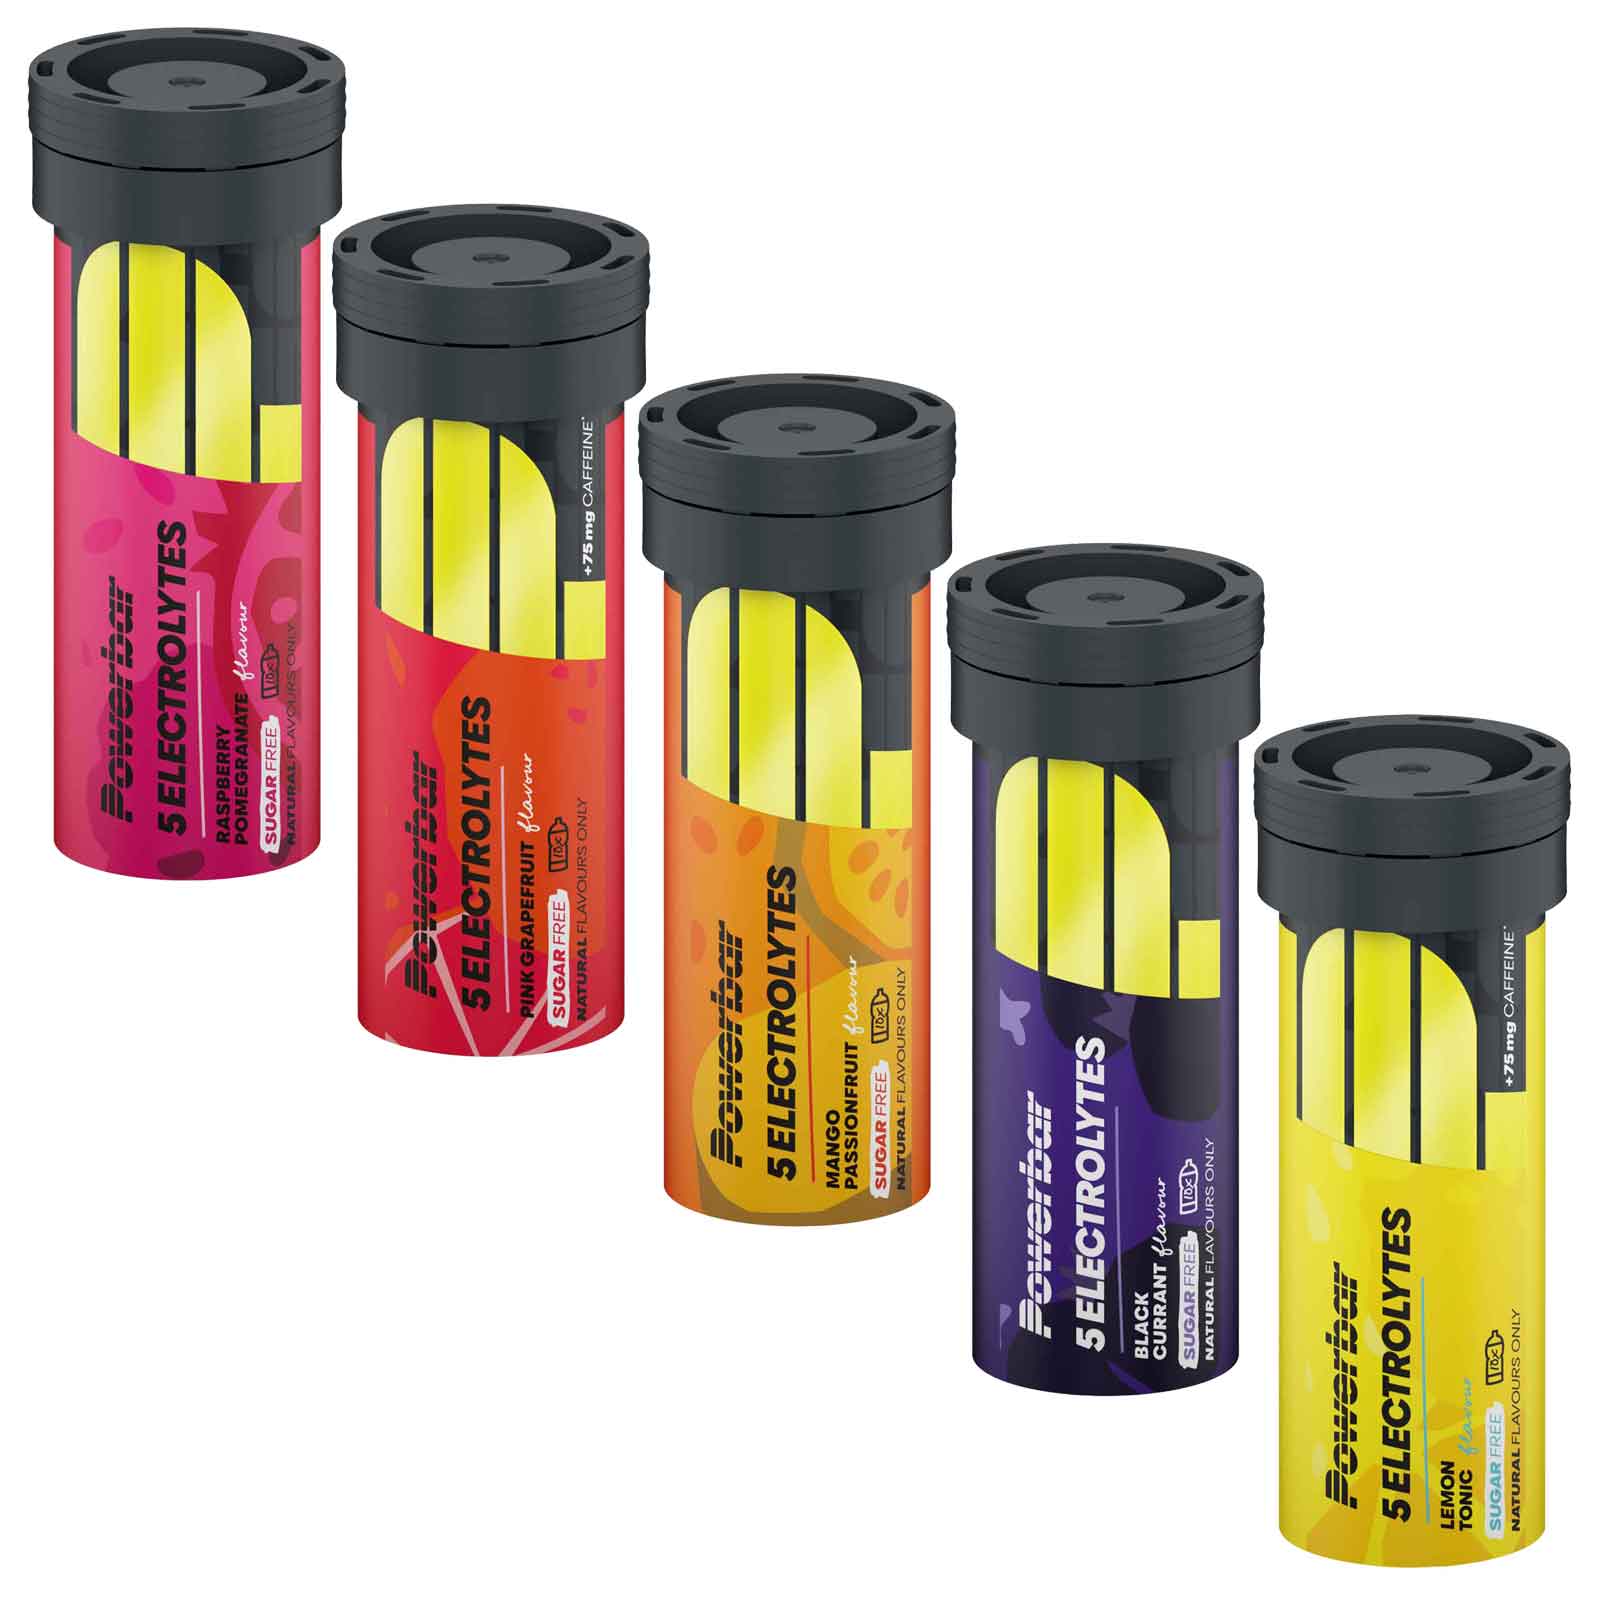 Picture of Powerbar 5Electrolytes Sports Drink - Effervescent Tablets - 10 pcs.